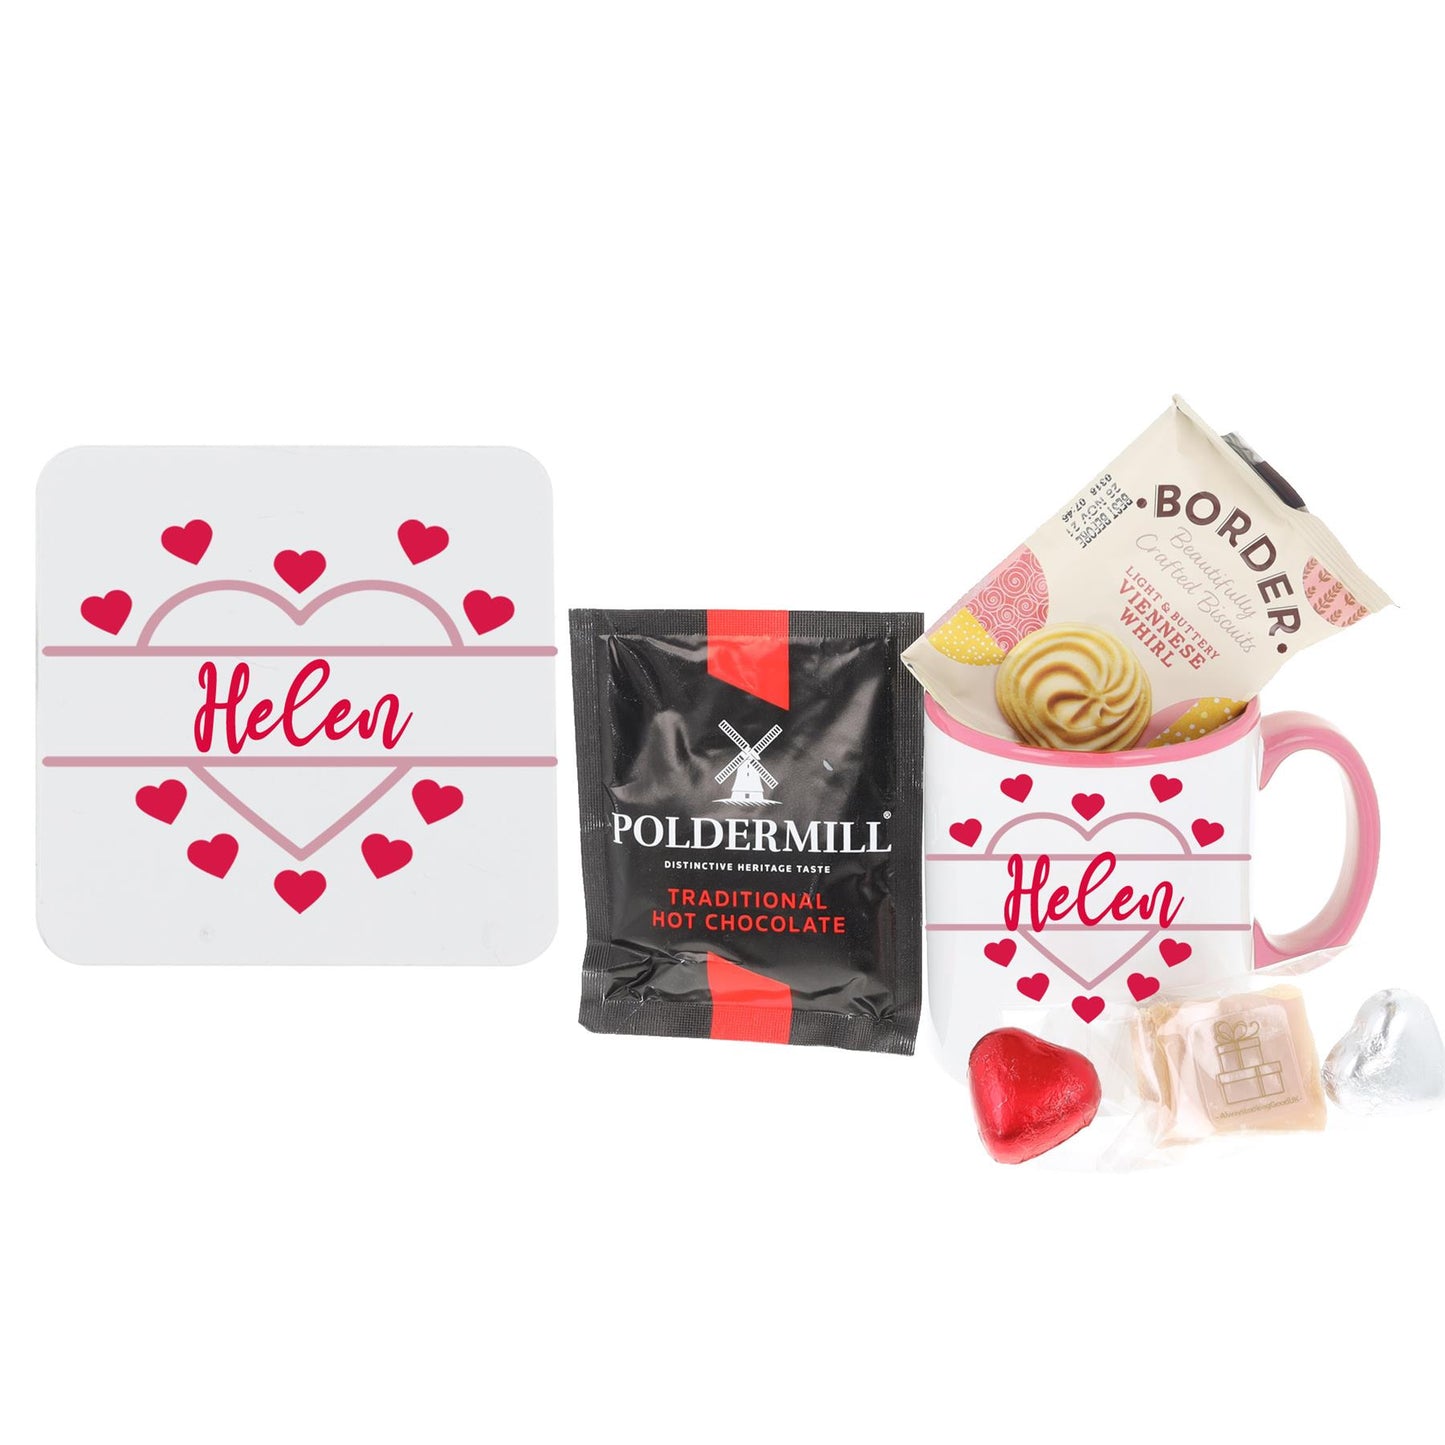 Personalised Pink Heart Design Mug and Coaster with Treats  - Always Looking Good - Hot Chocolate Filled Set  